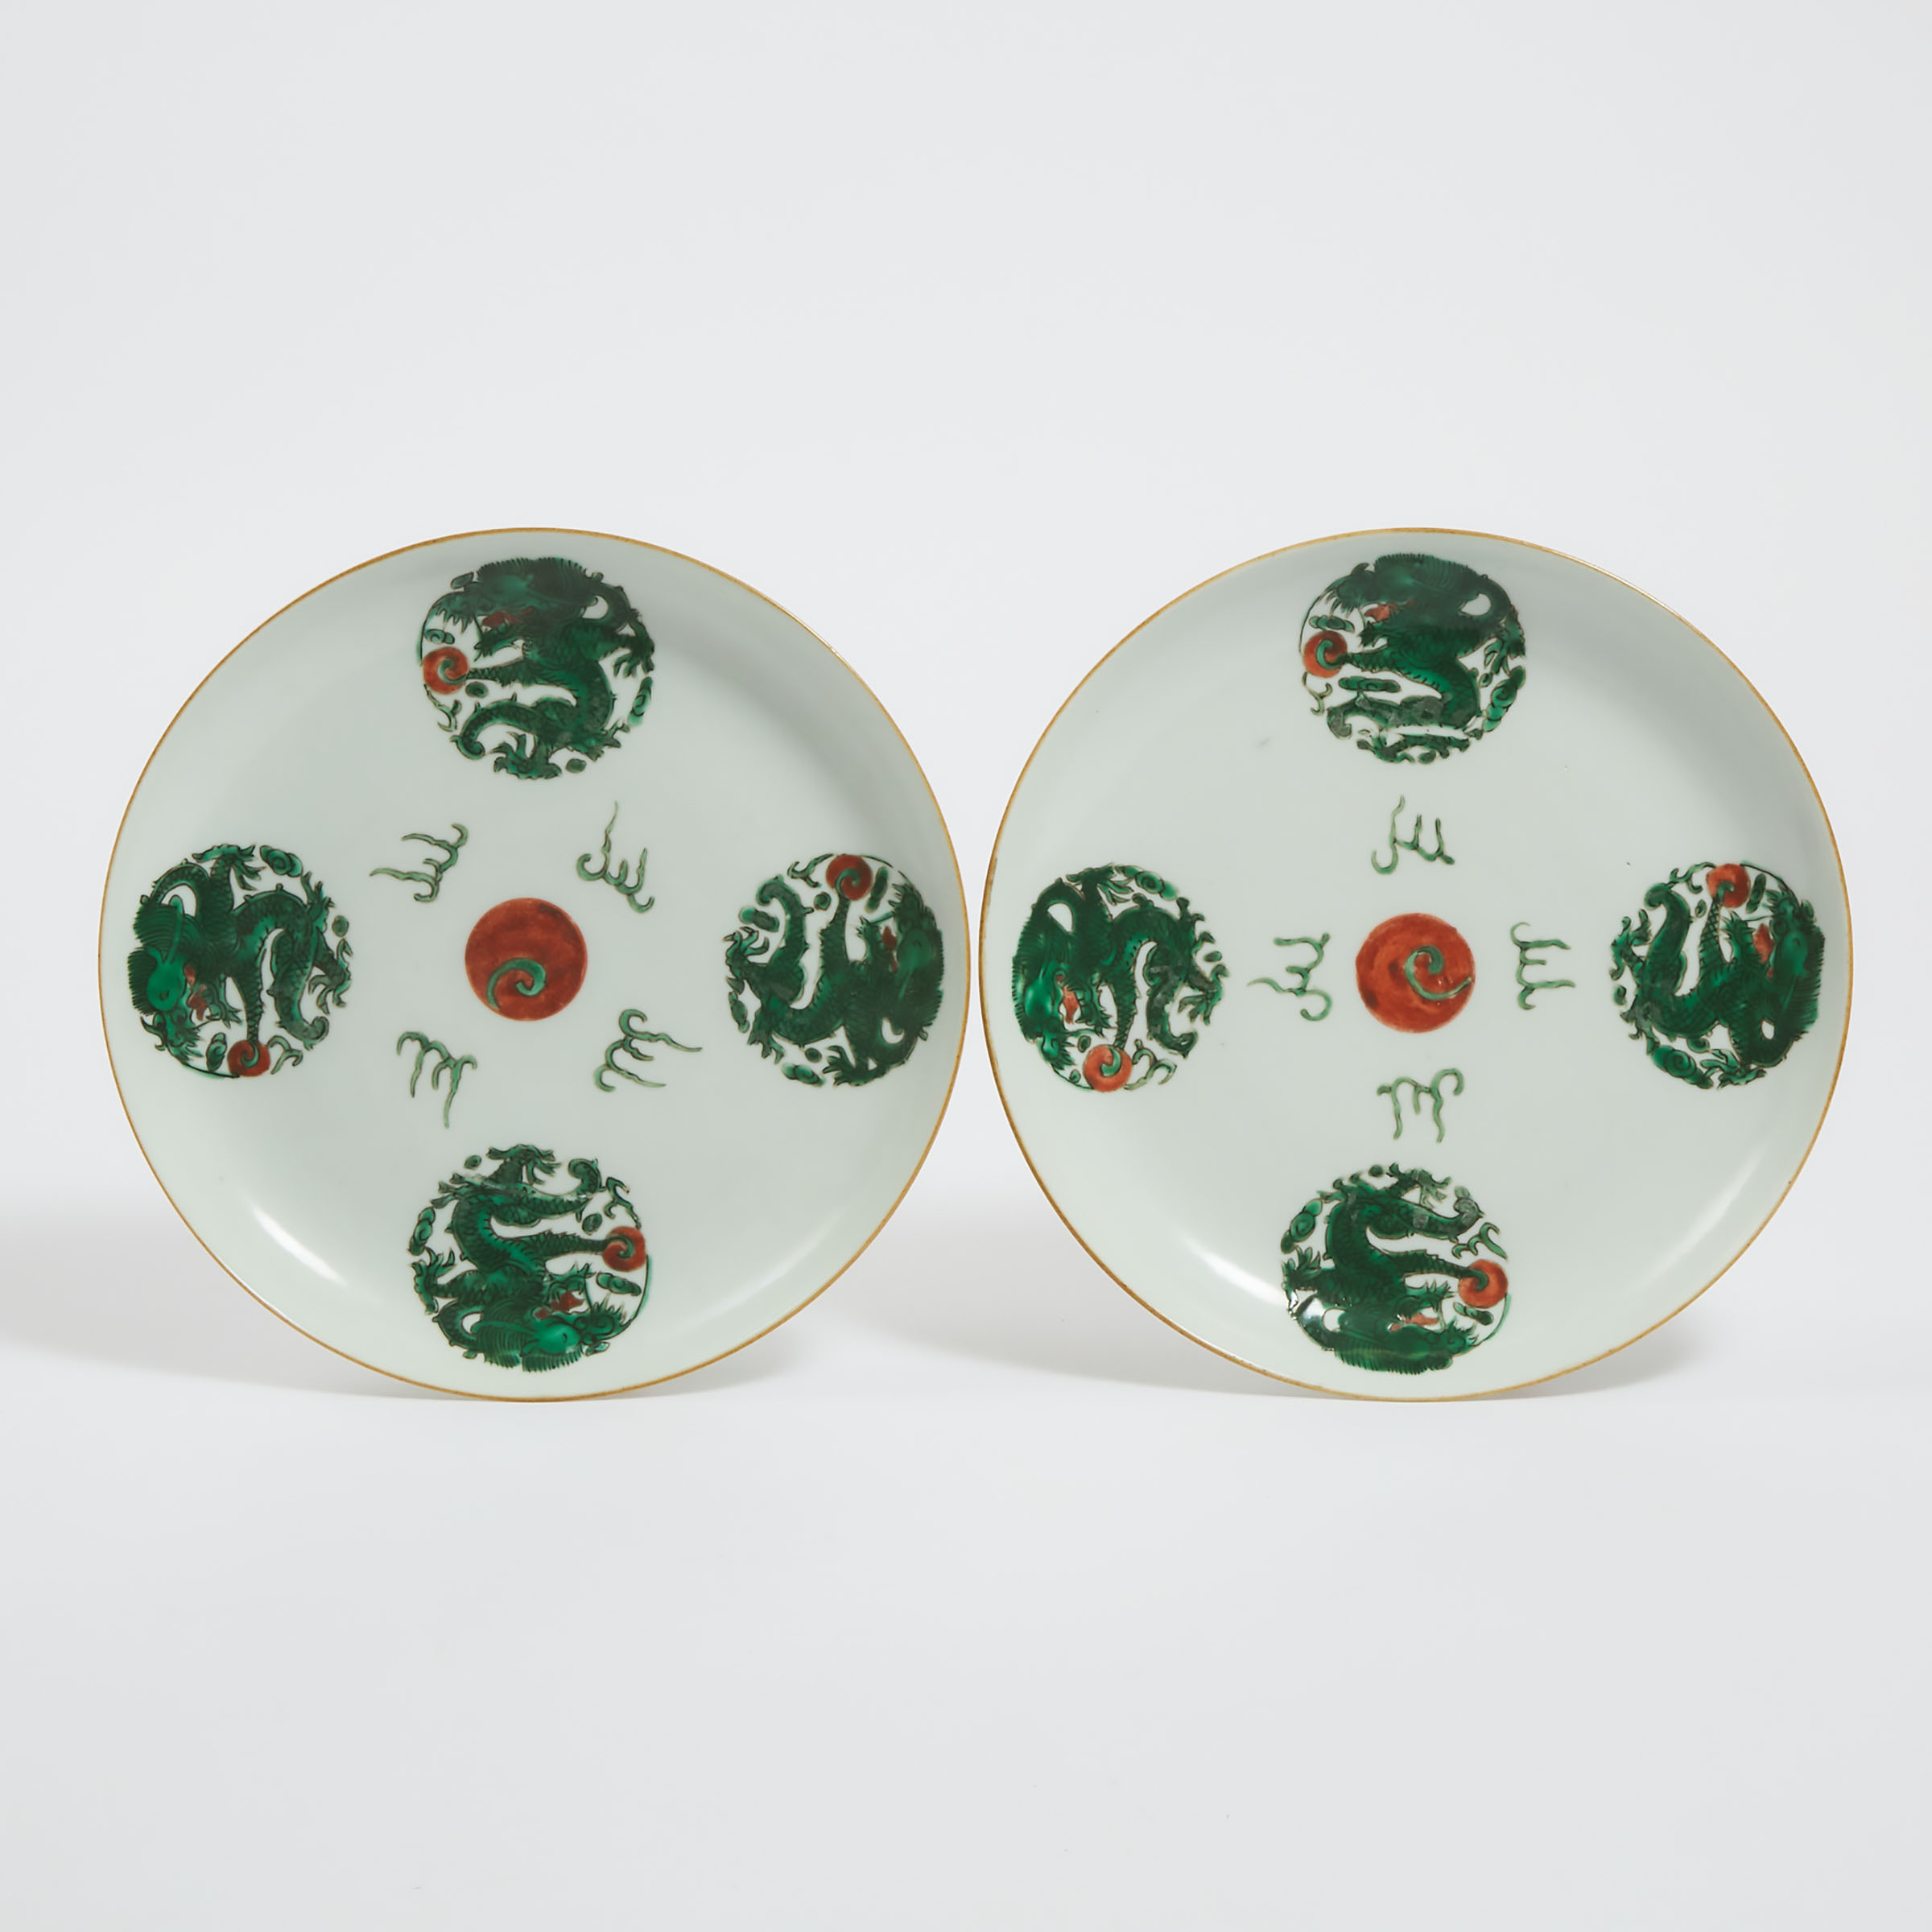 A Pair of Enameled 'Dragon Medallion' Dishes, Tongzhi Mark, Late 19th Century